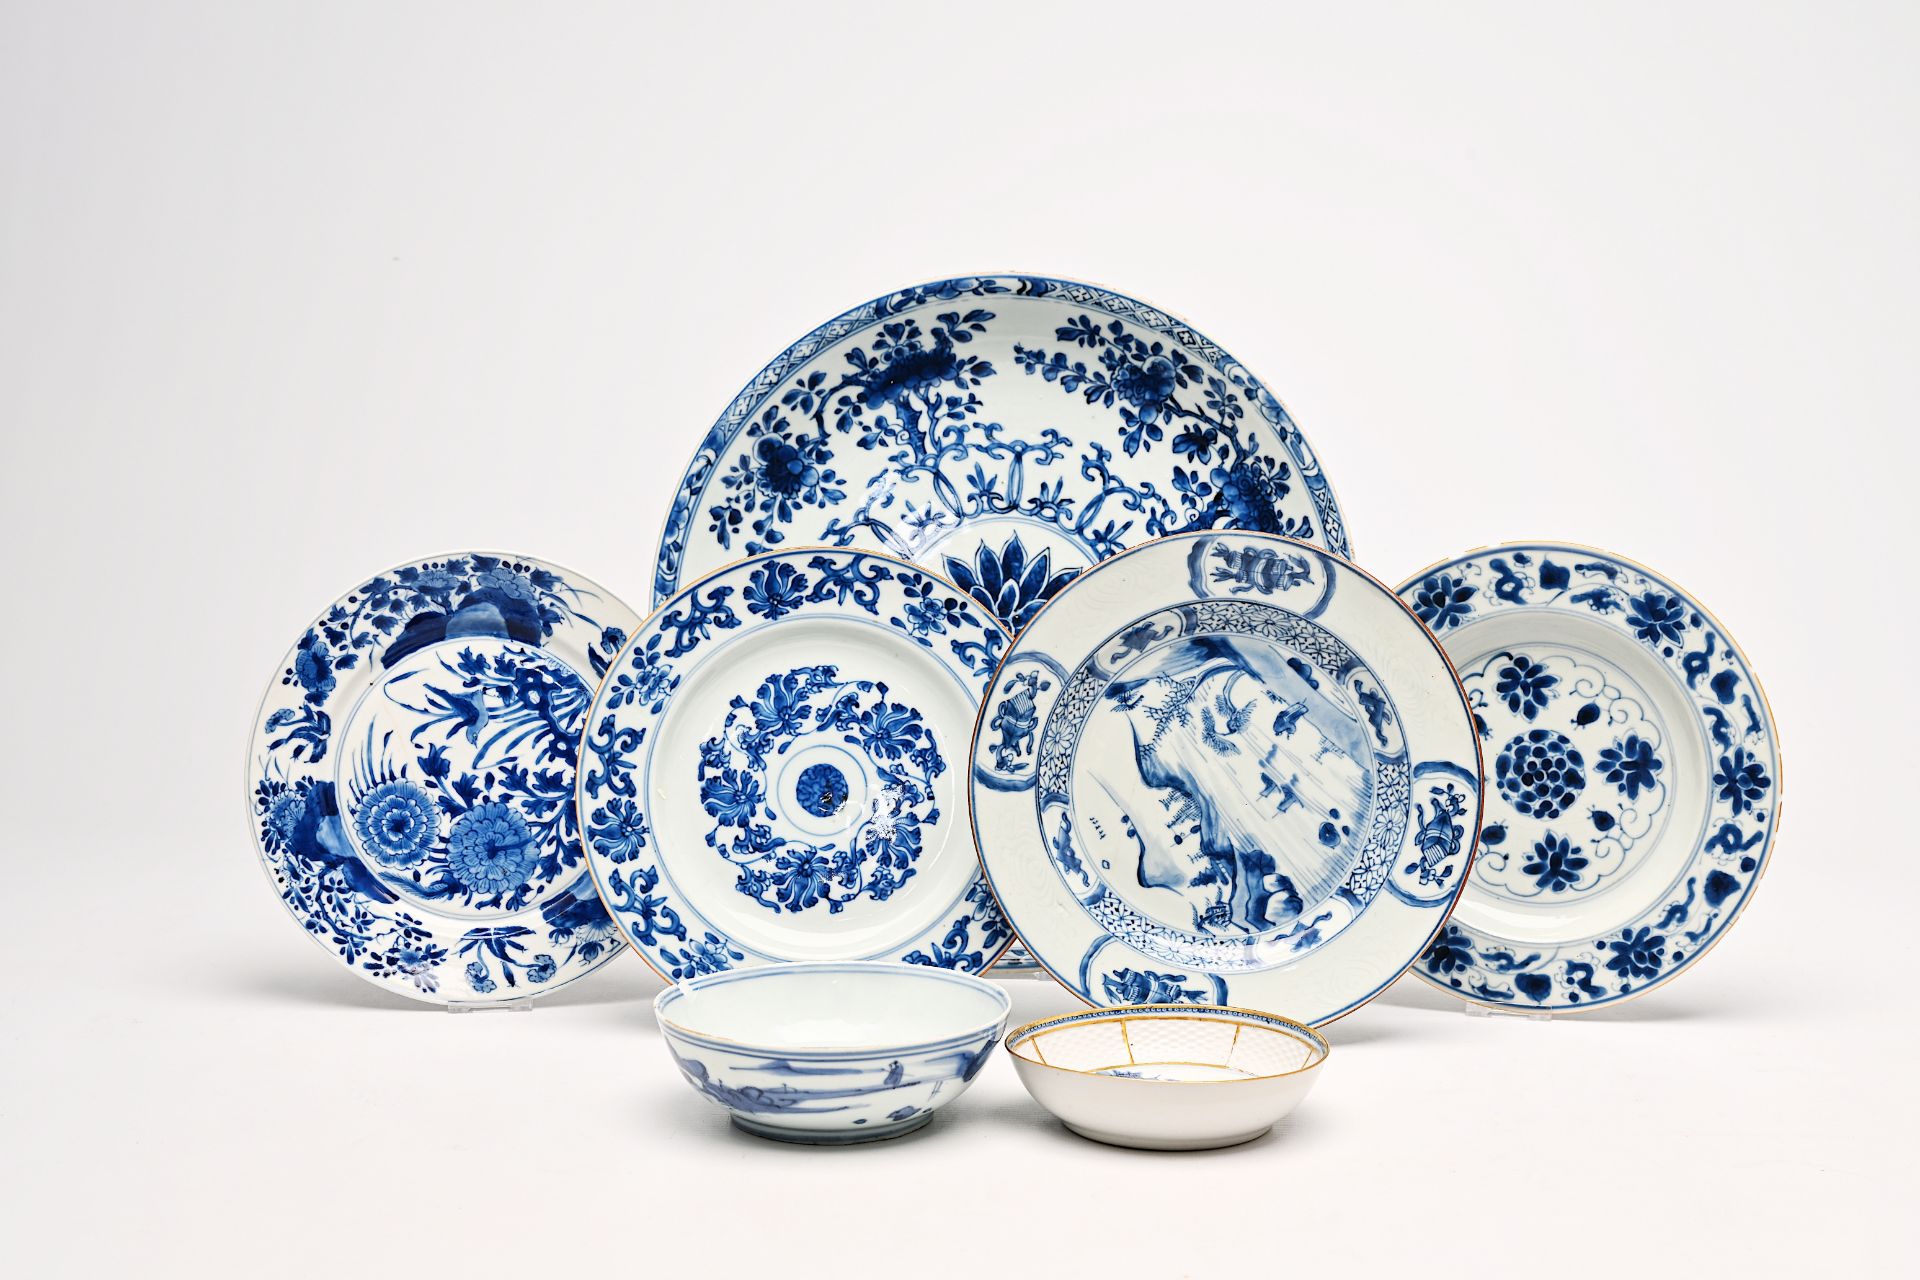 A varied collection of Chinese blue, white and gilt porcelain, Ming/Qianlong